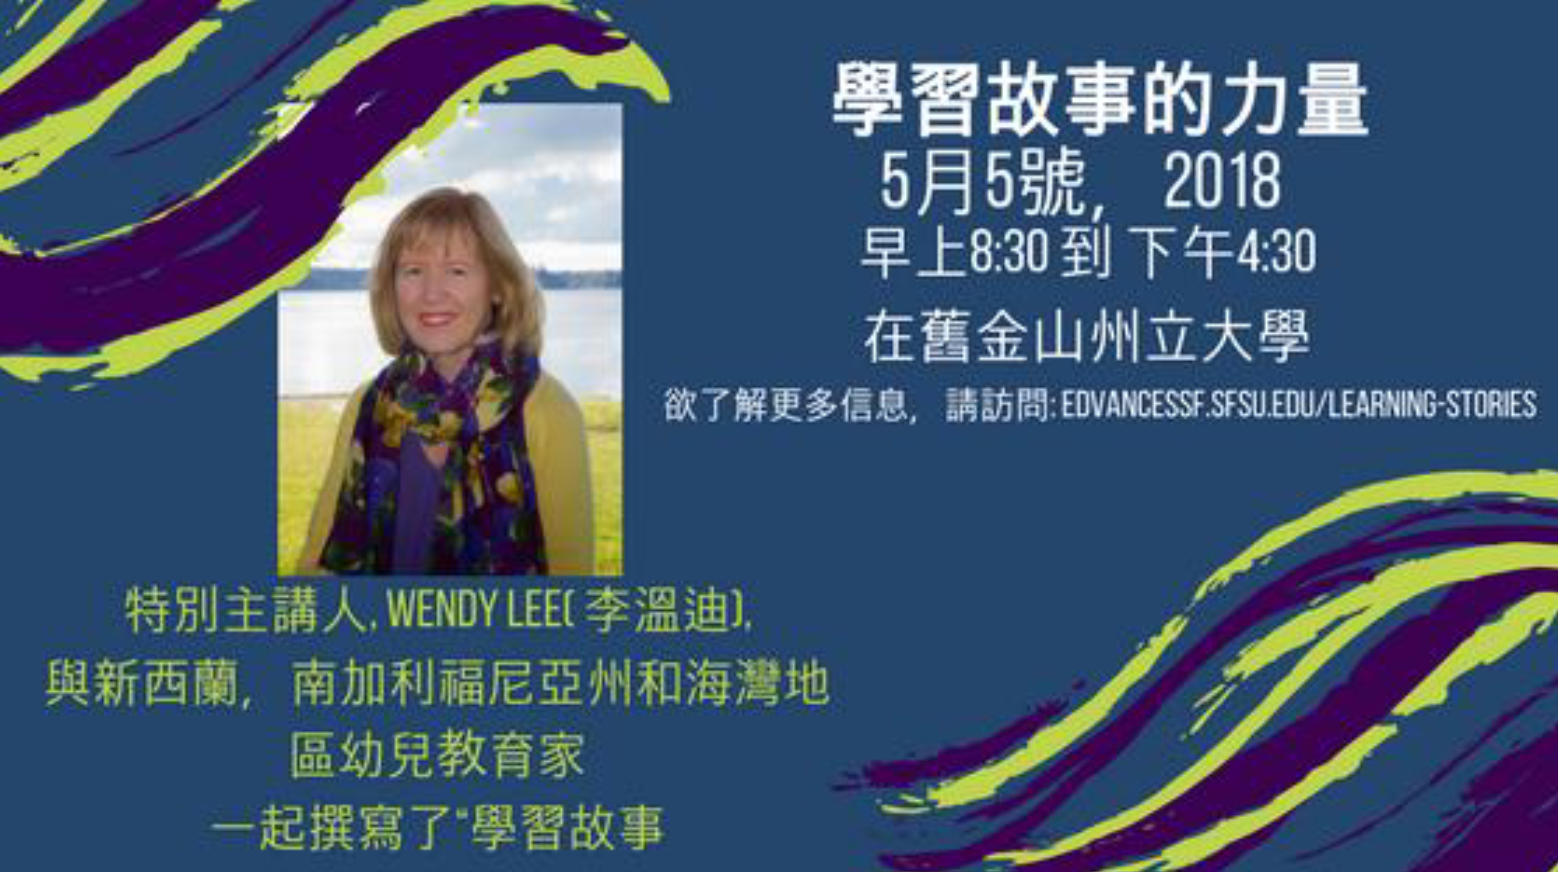 Learning Stories Conference flyer in Chinese